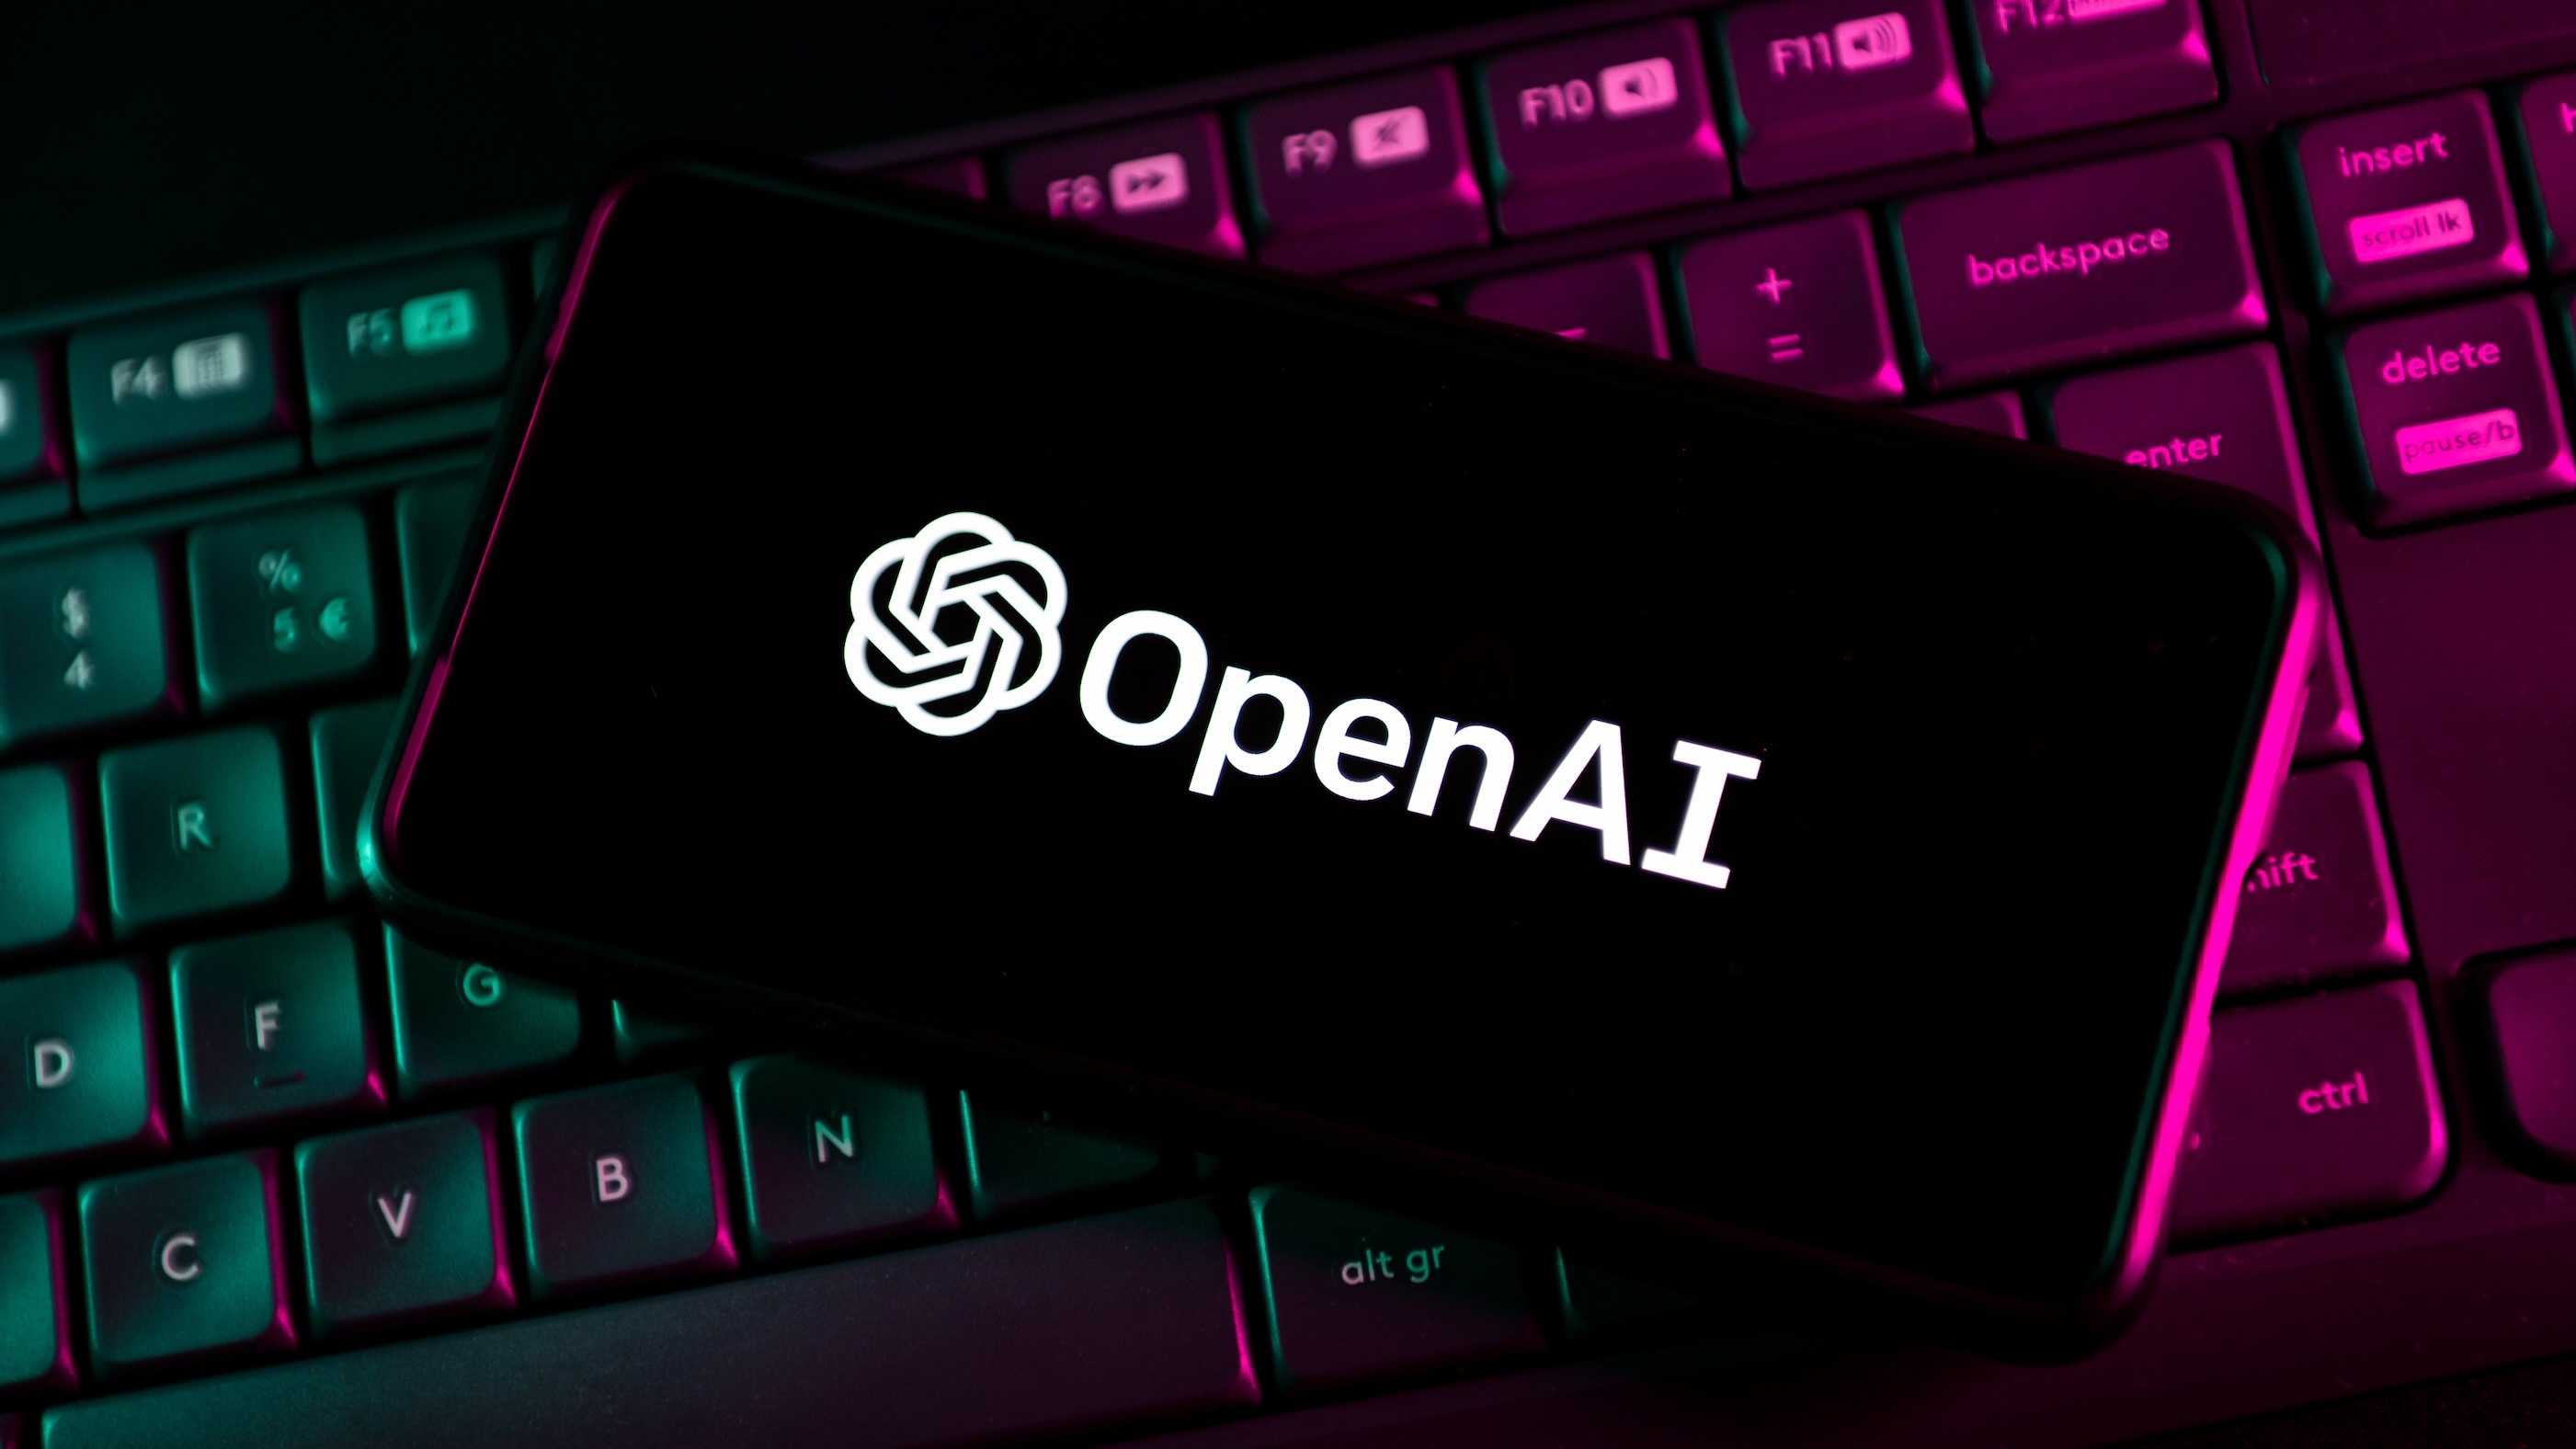 OpenAI and ChatGPT logo on a phone on top of a keyboard